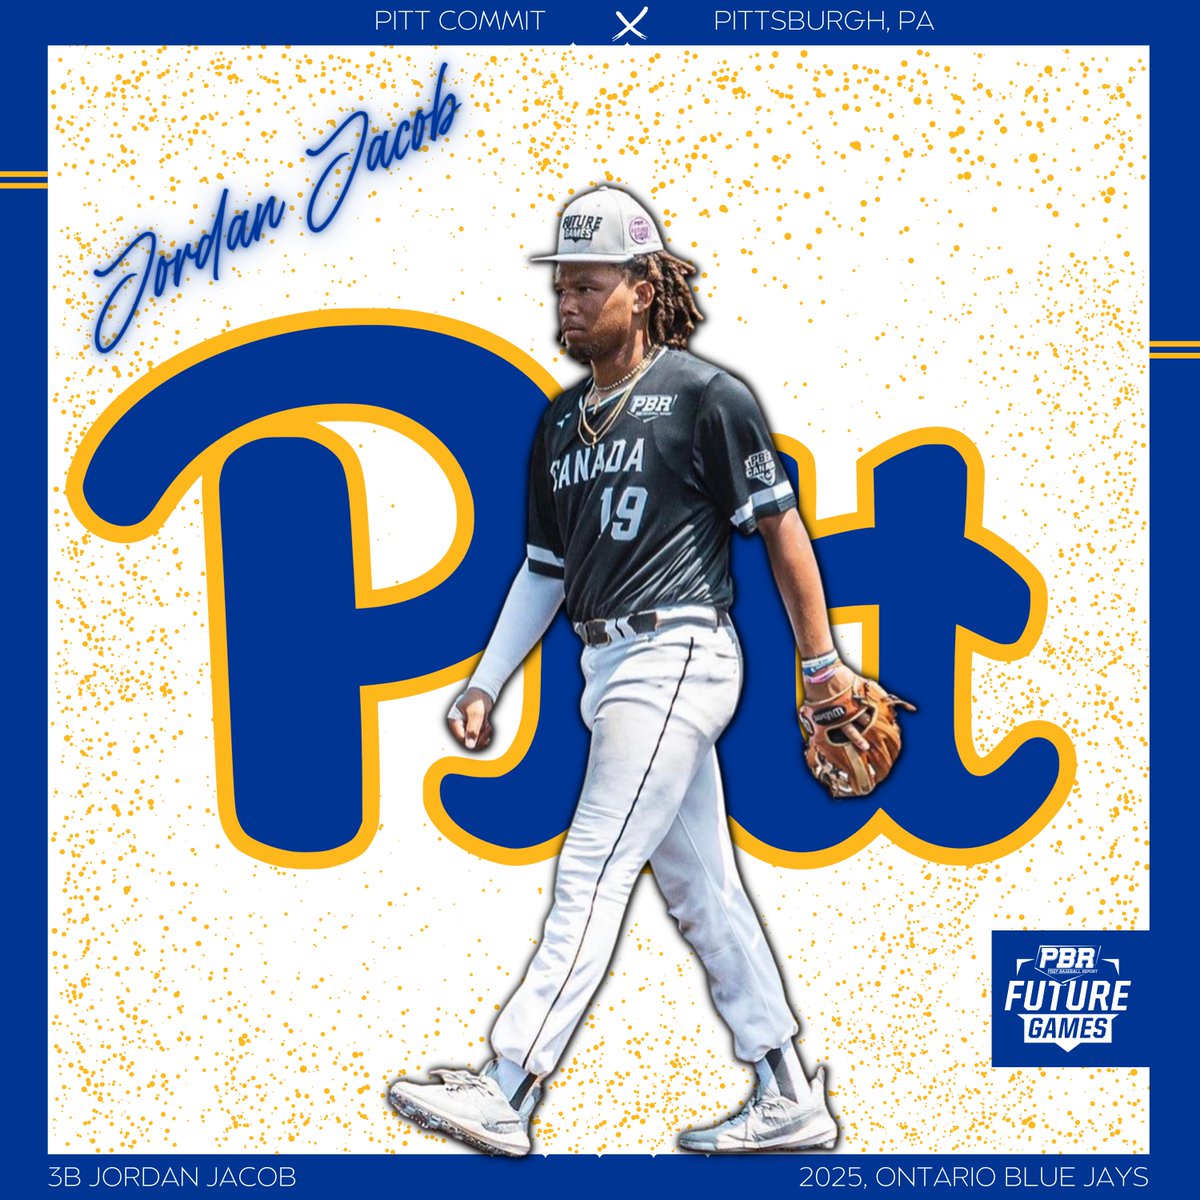 🚨𝐂𝐎𝐌𝐌𝐈𝐓𝐌𝐄𝐍𝐓 𝐀𝐋𝐄𝐑𝐓🚨 '25 3B Jordan Jacob (@jordanbb26) has announced his commitment to the University of Pittsburgh. Jacob is the 7th commitment from Canada's 2023 Future Games team. @Pitt_BASE || @OntarioBlueJays